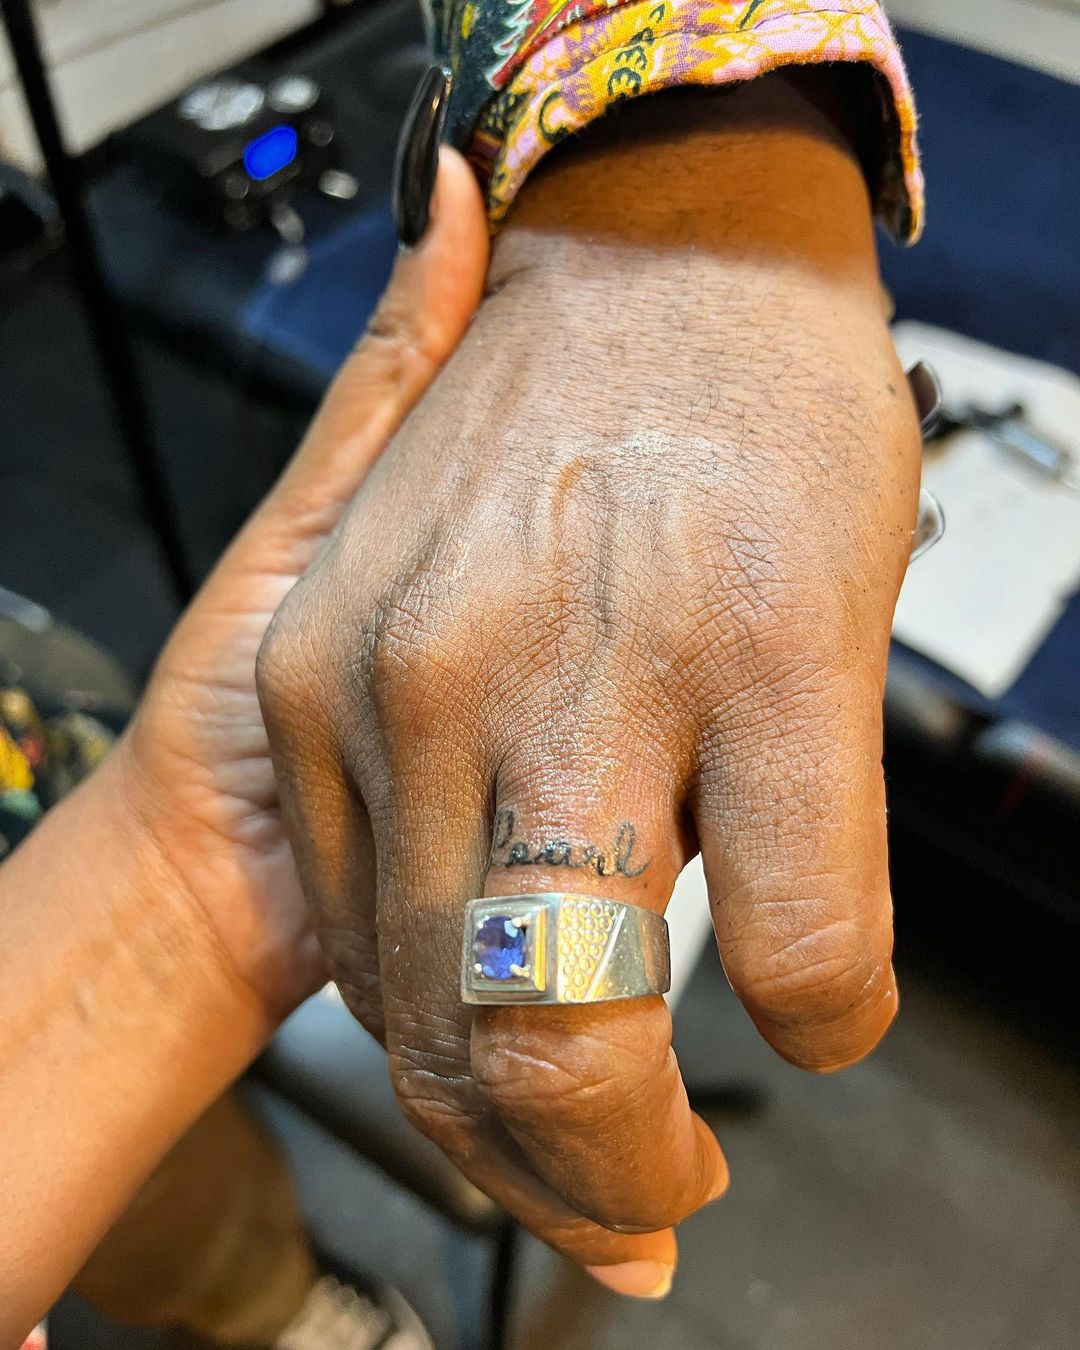 Watch: Actor Sello Maake kaNcube tattoos Pearl's name on his ring finger - Mbare Times